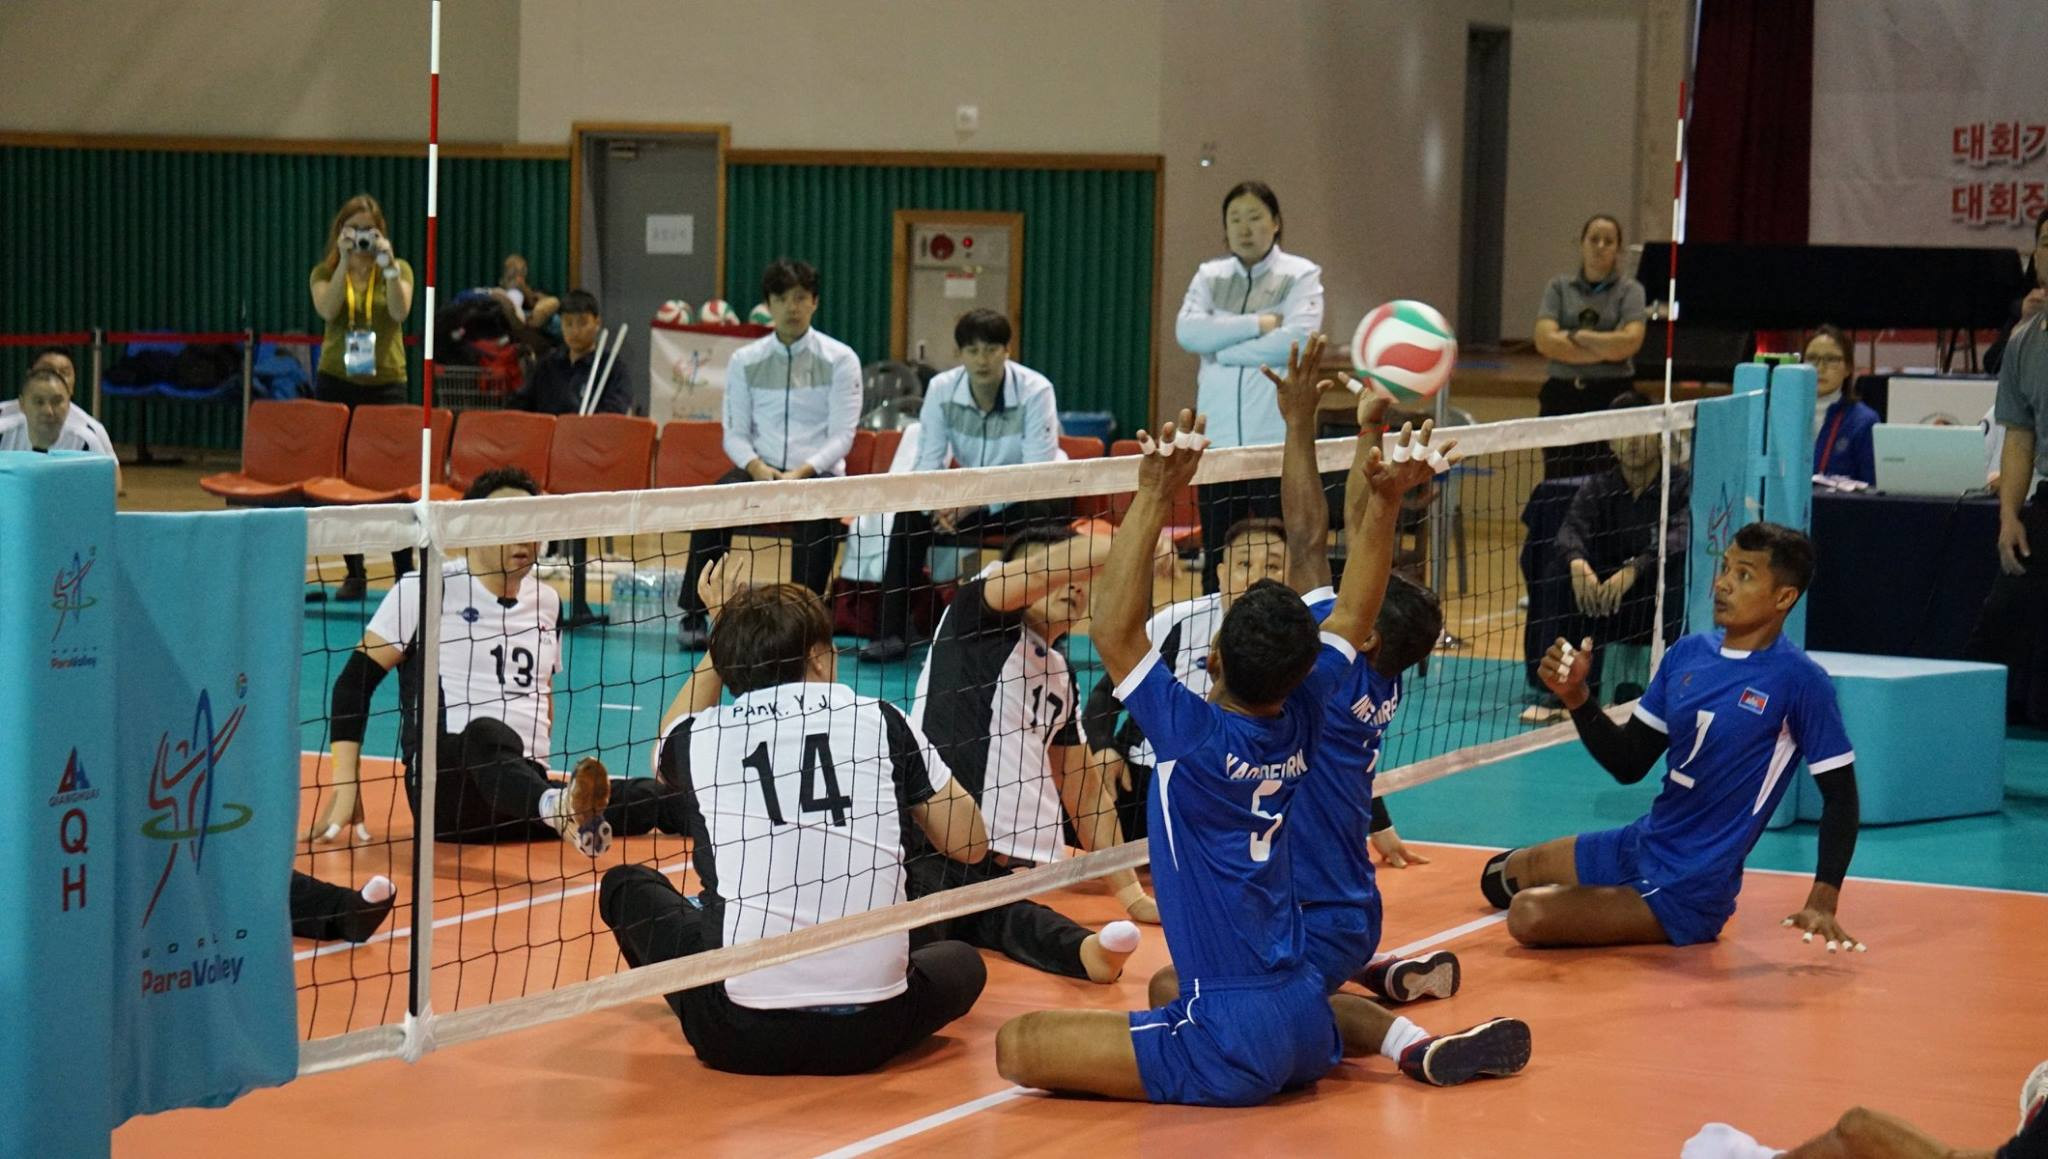 Home nation South Korea defeated Cambodia today to make it two wins out of two at the final qualification tournament for the 2018 Sitting Volleyball World Championships in Jeju ©World ParaVolley/Facebook